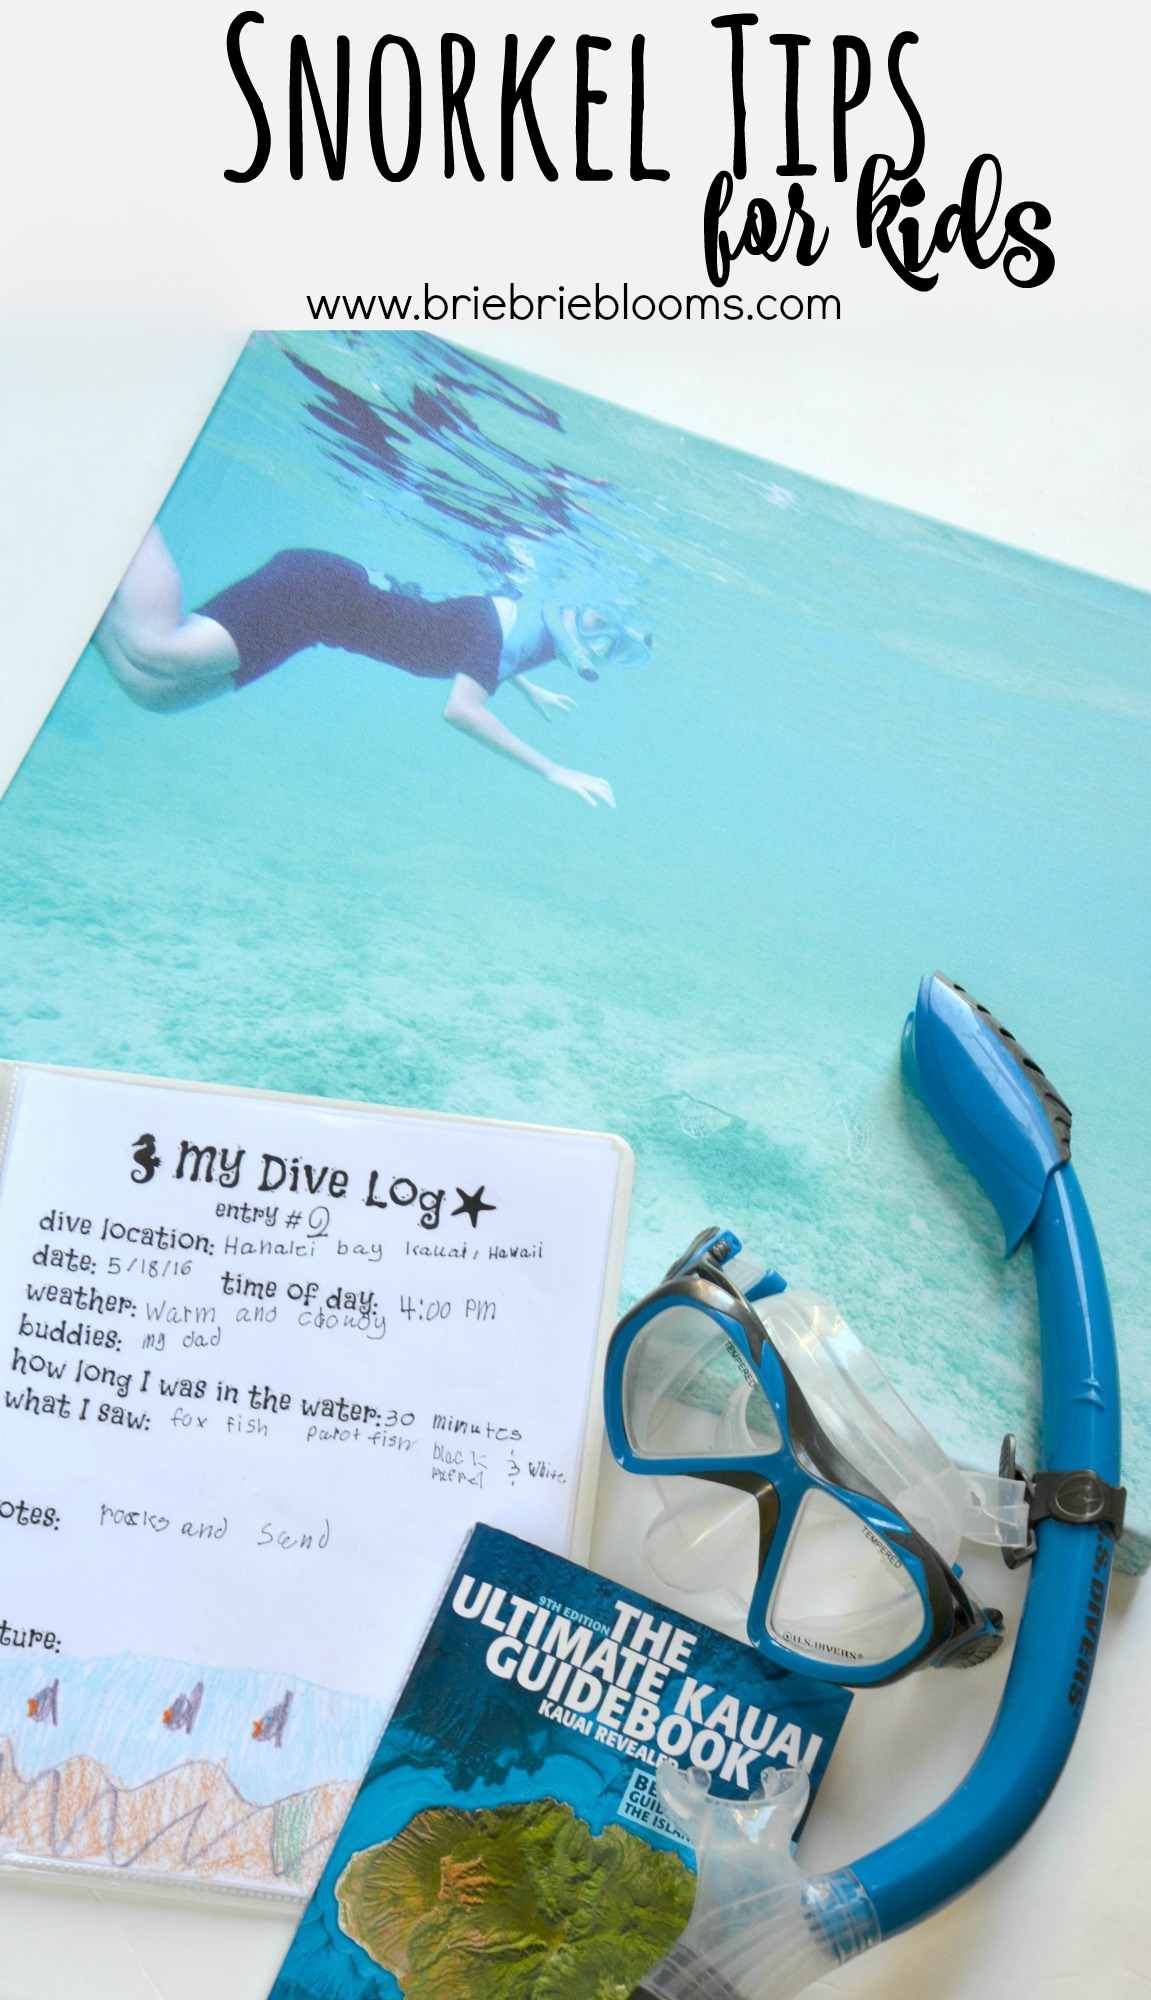 Snorkel tips for kids canvas giveaway